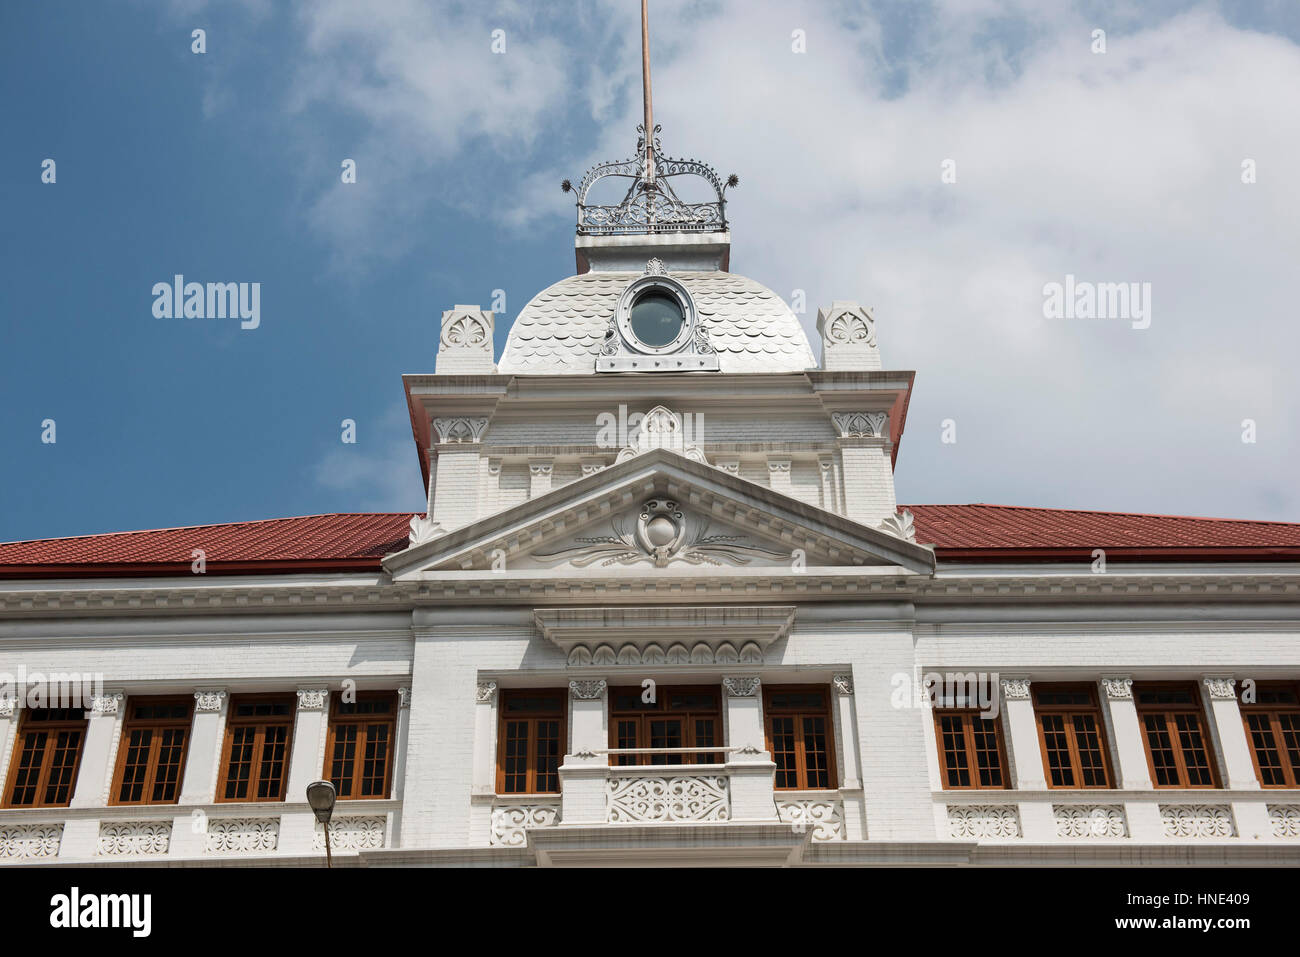 Colonial Building, Colombo Fort, Colombo, Sri Lanka Banque D'Images